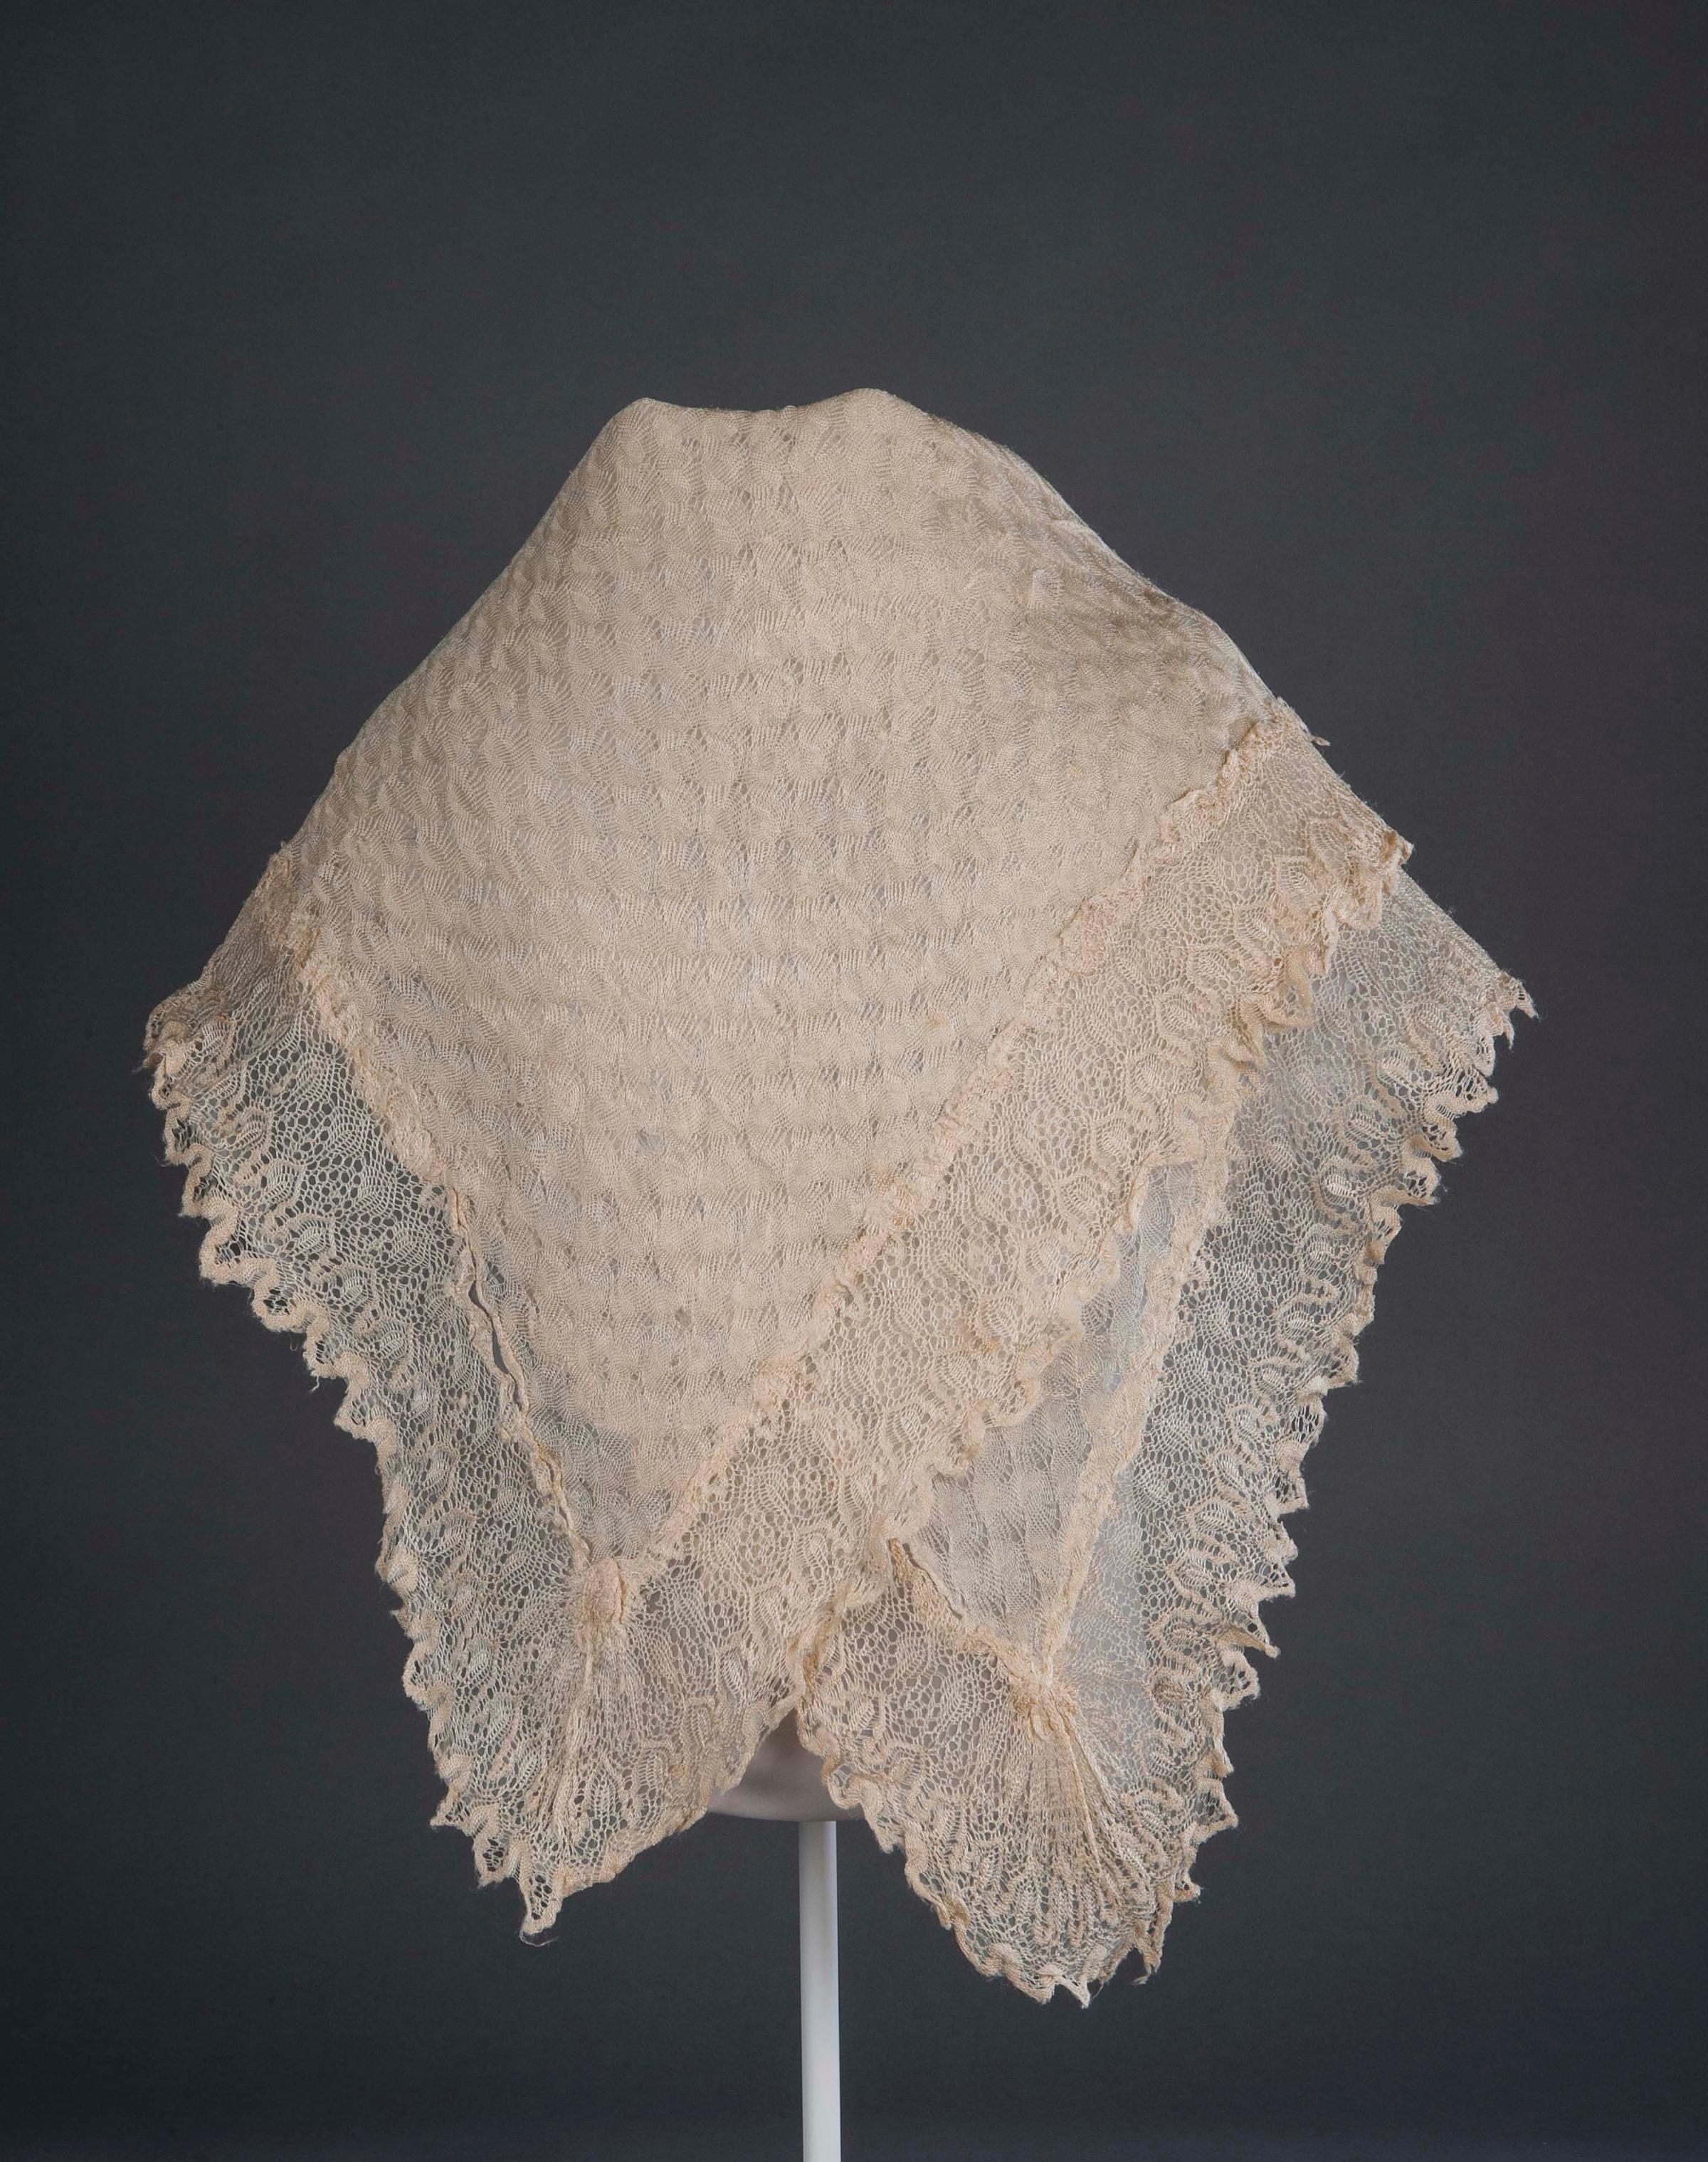 Silk lace and linen shawl given to Harriet Tubman by Queen Victoria